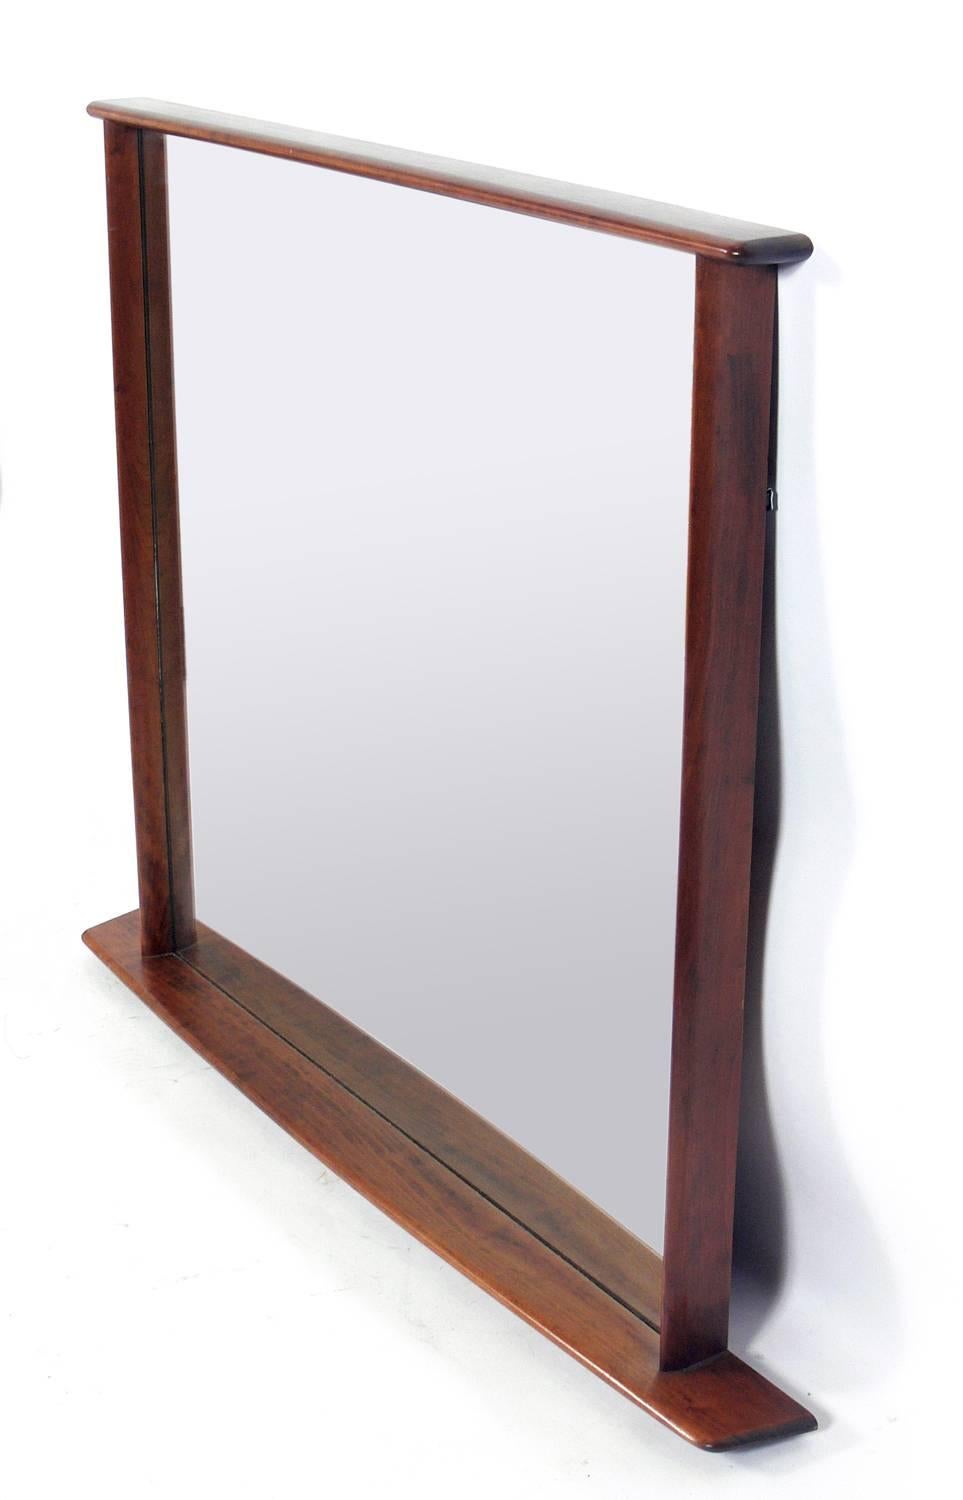 Walnut mirror, designed by George Nakashima for Widdicomb, circa 1950s. Retains warm original patina. Please see our other 1stdibs listings for the matching large-scale chest or dresser from the same estate.